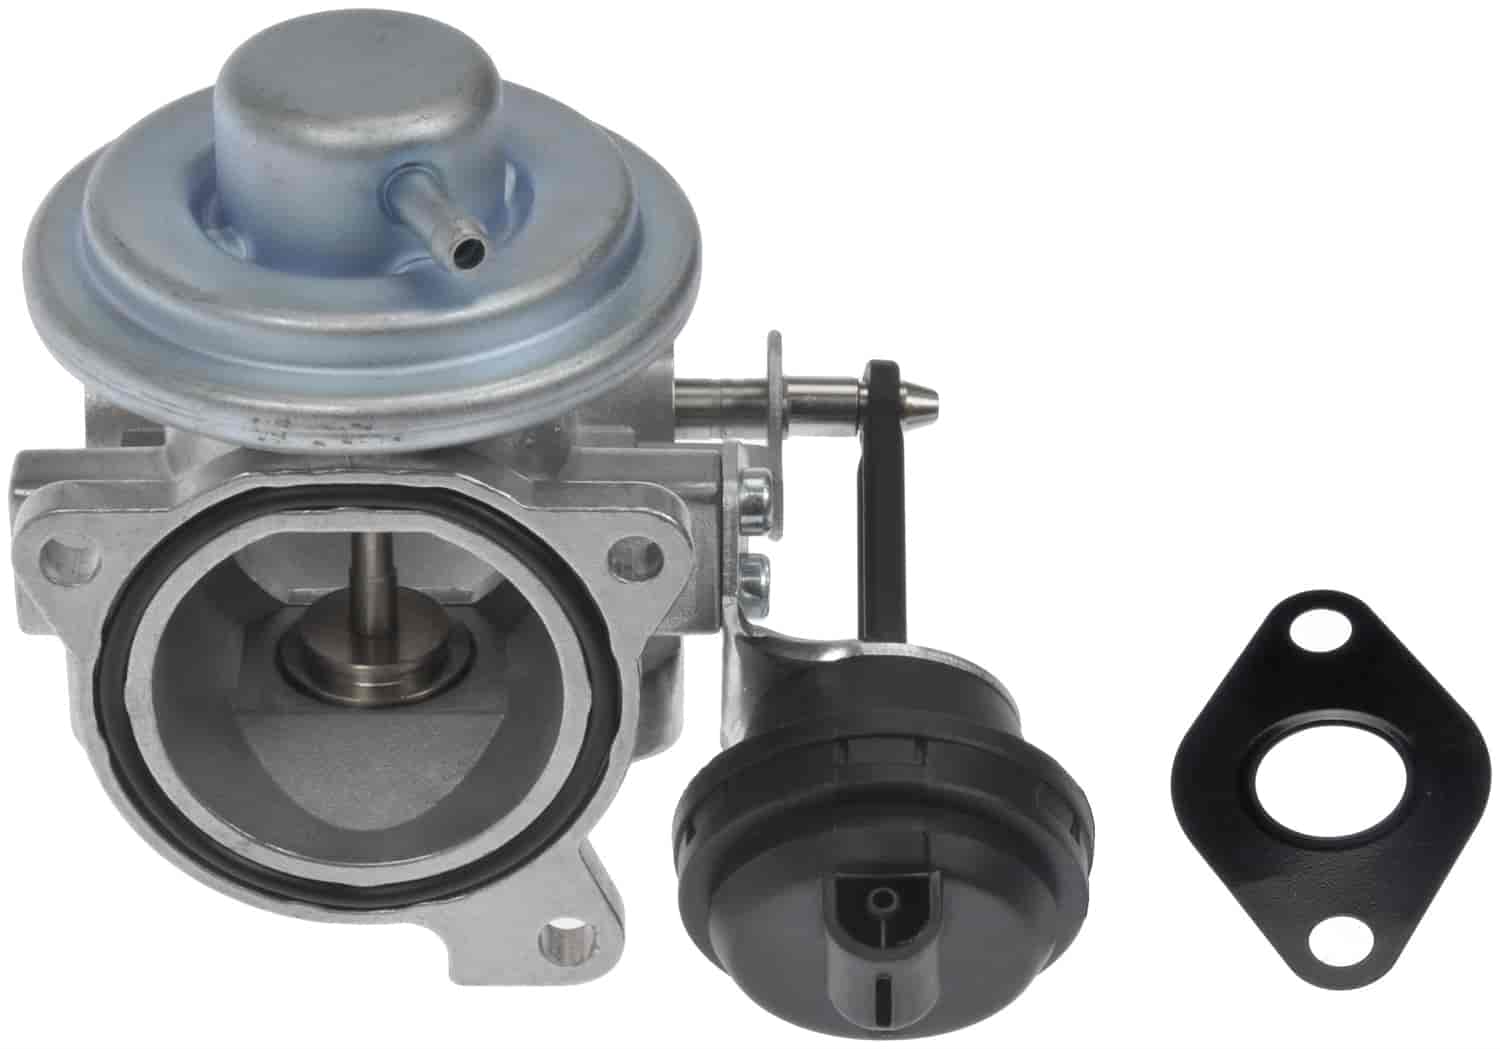 Exhaust Gas Recirculation Valve And Gaskets